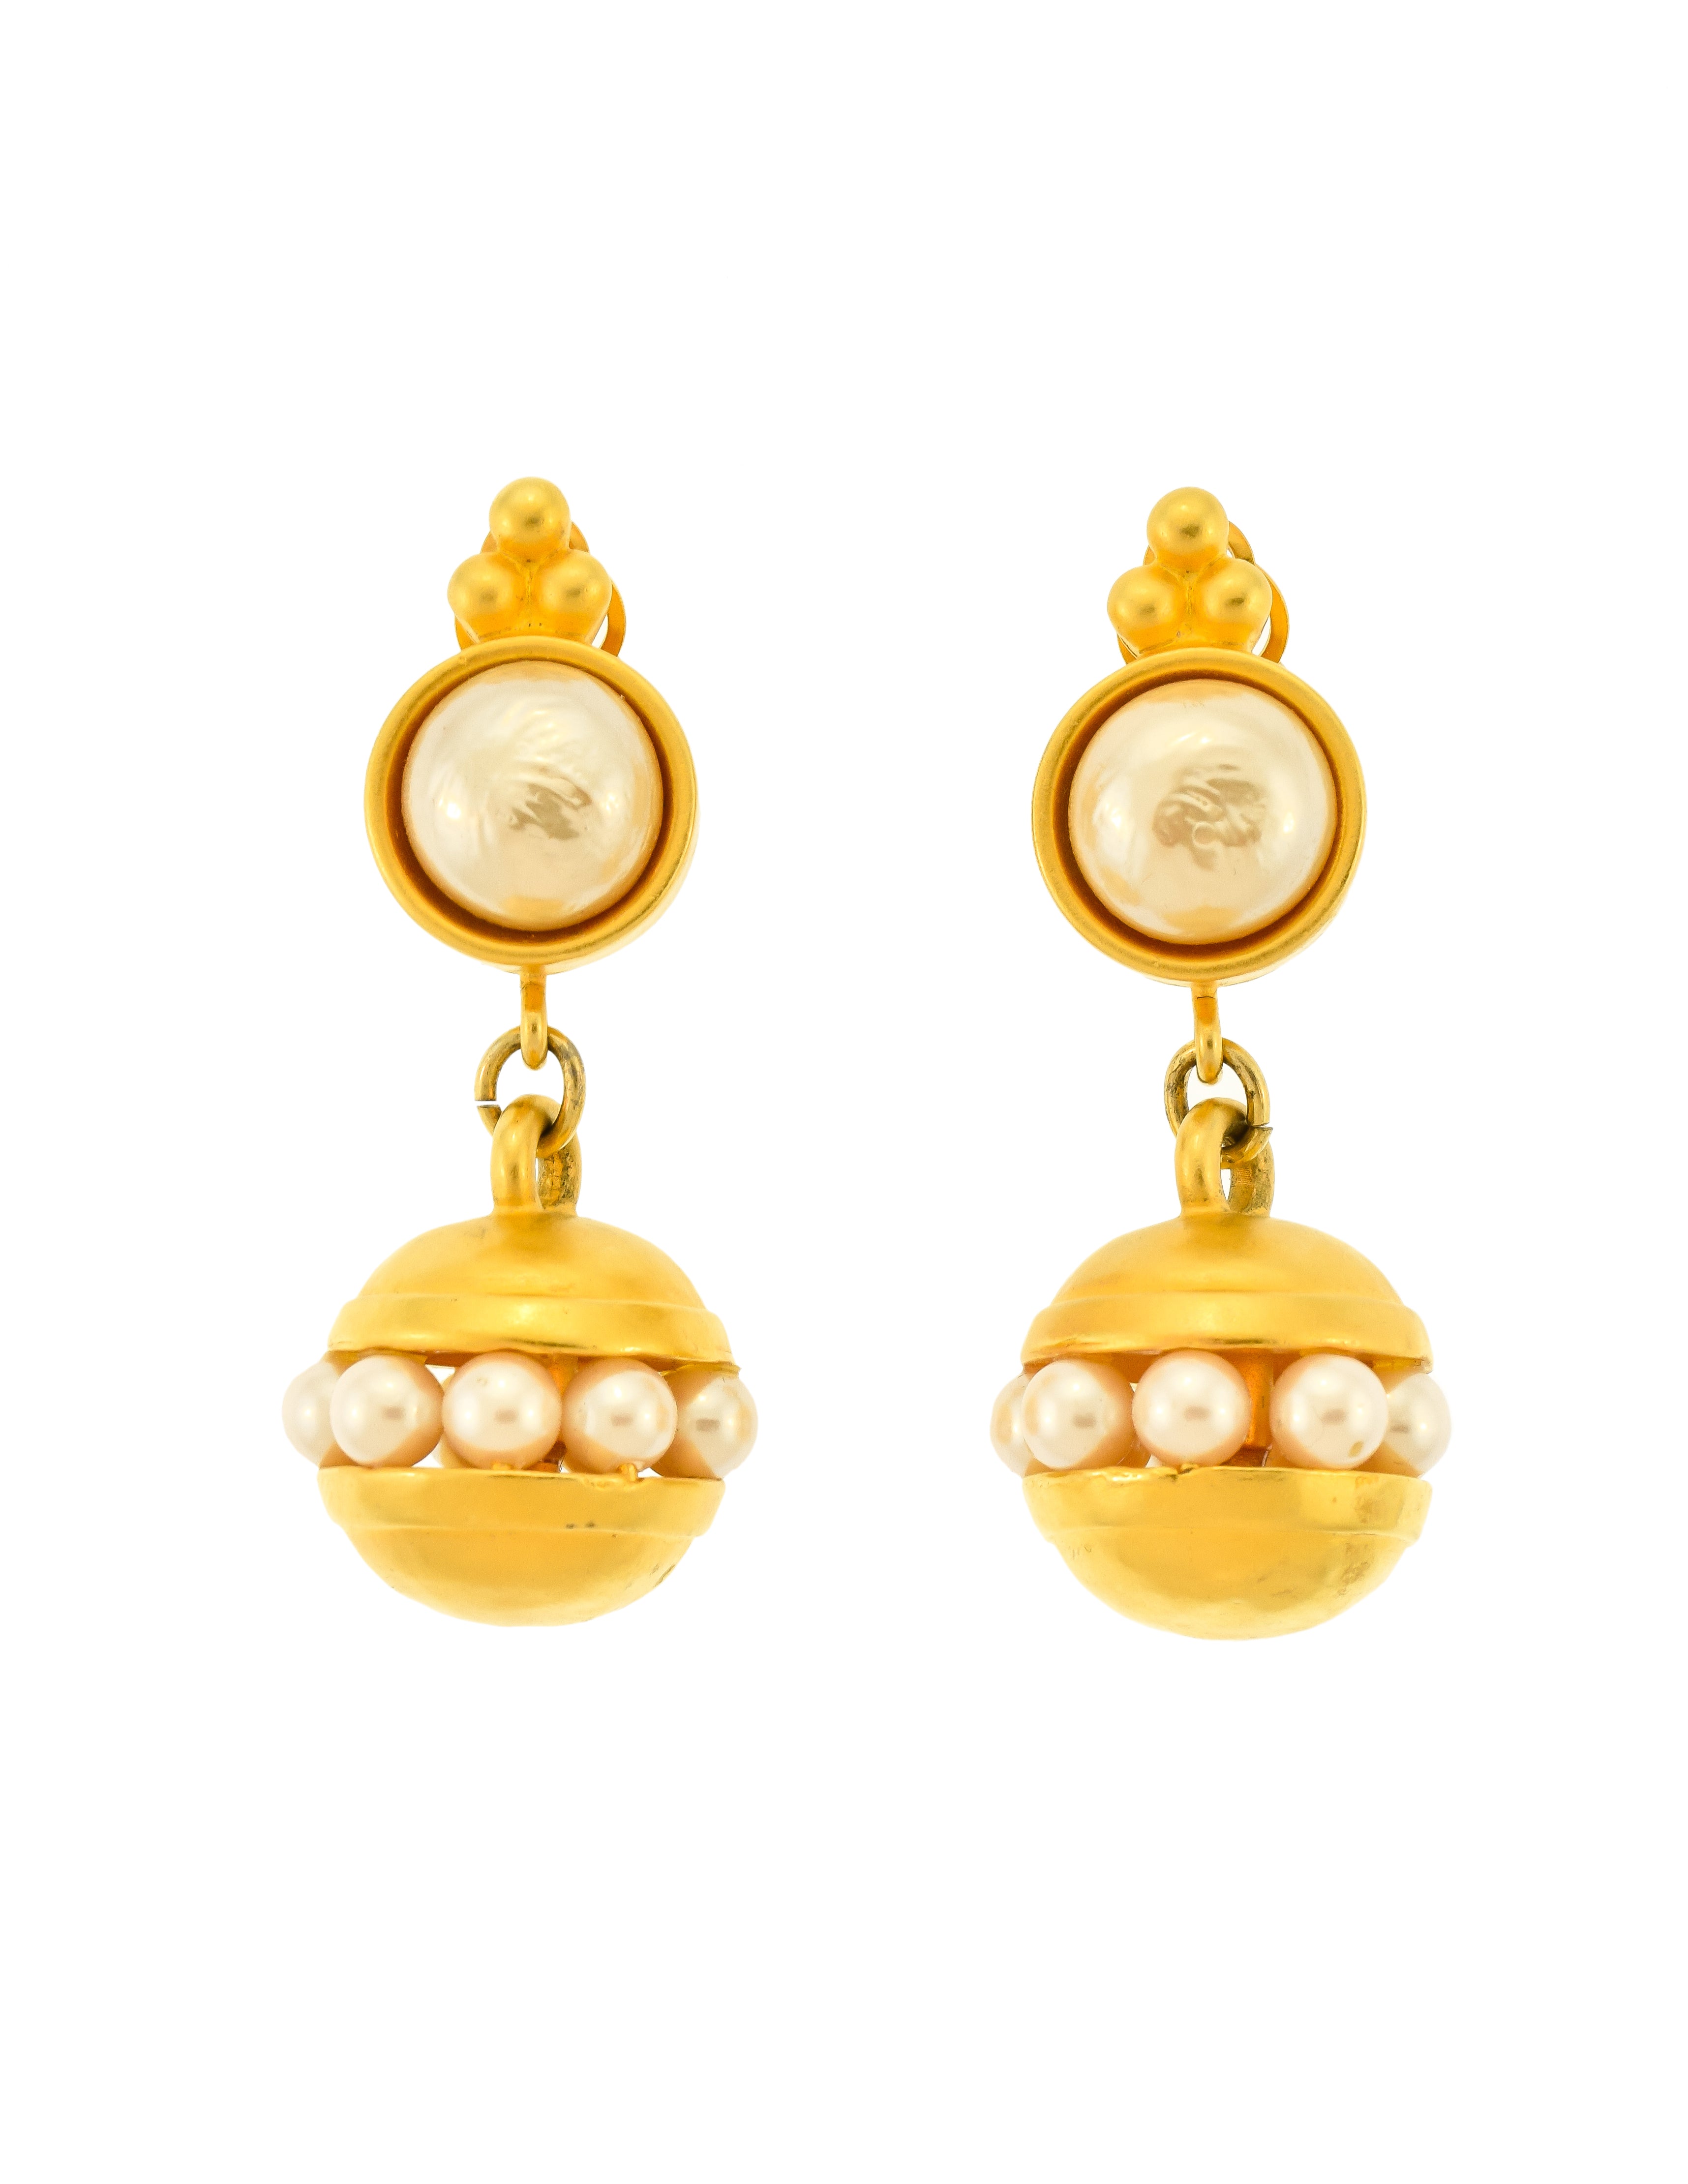 Karl Lagerfeld Vintage Gold and Pearl Dangle Earrings - from Amarcord ...